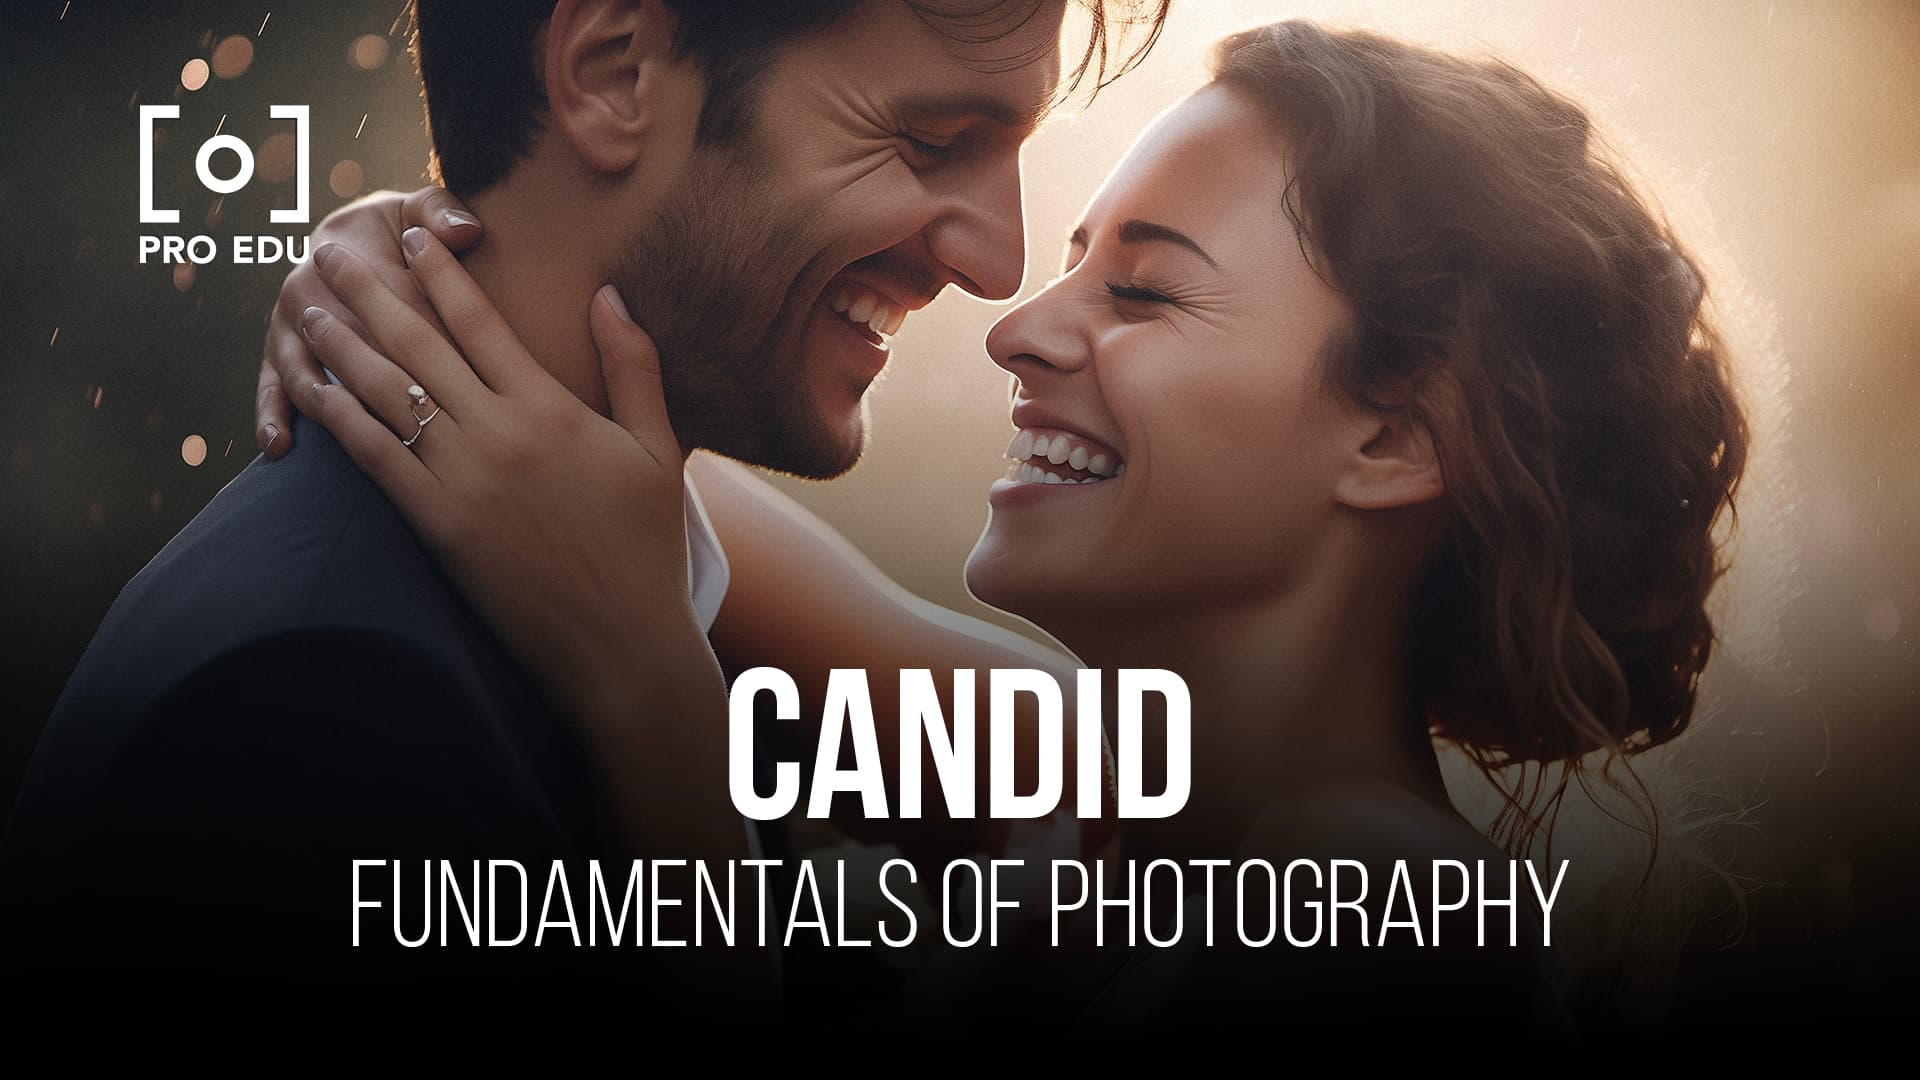 Capturing authentic and spontaneous moments in candid photography